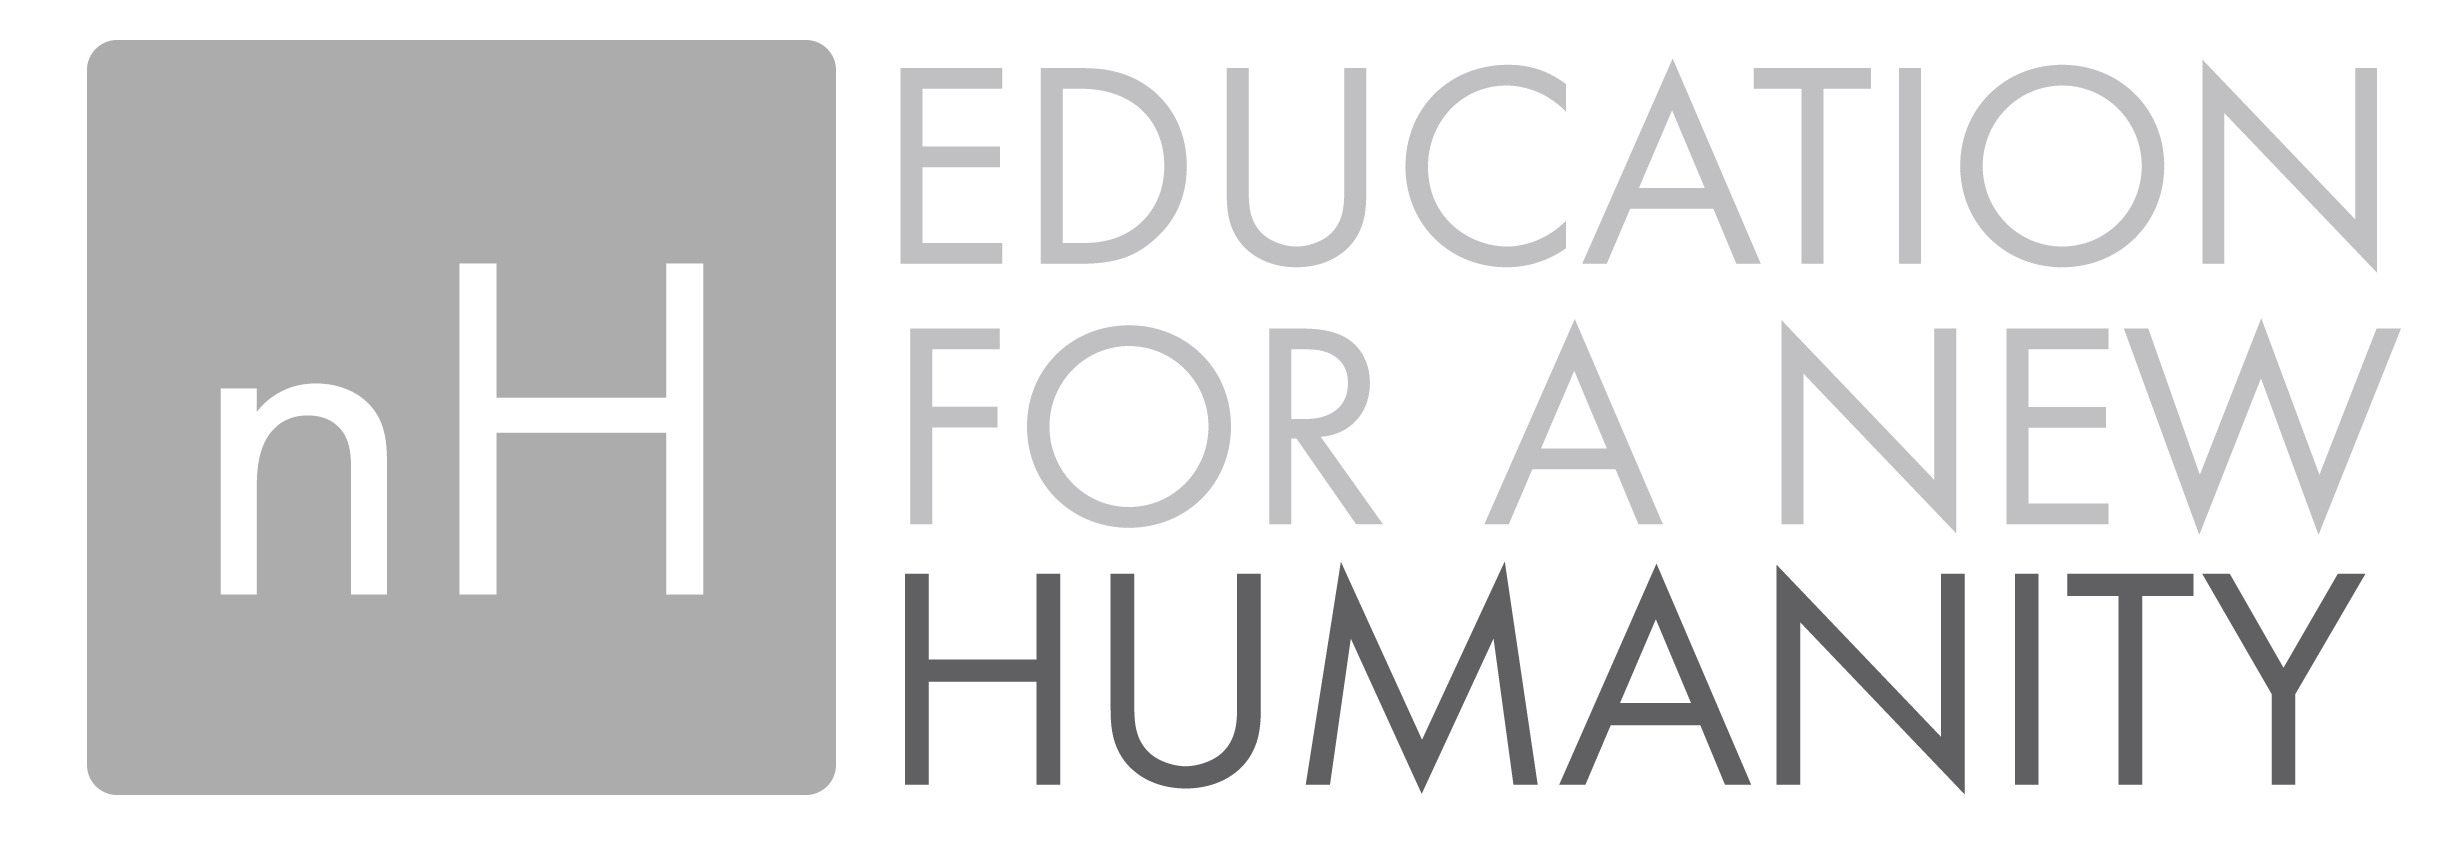 New Humantity: Education for a New Humanity. 